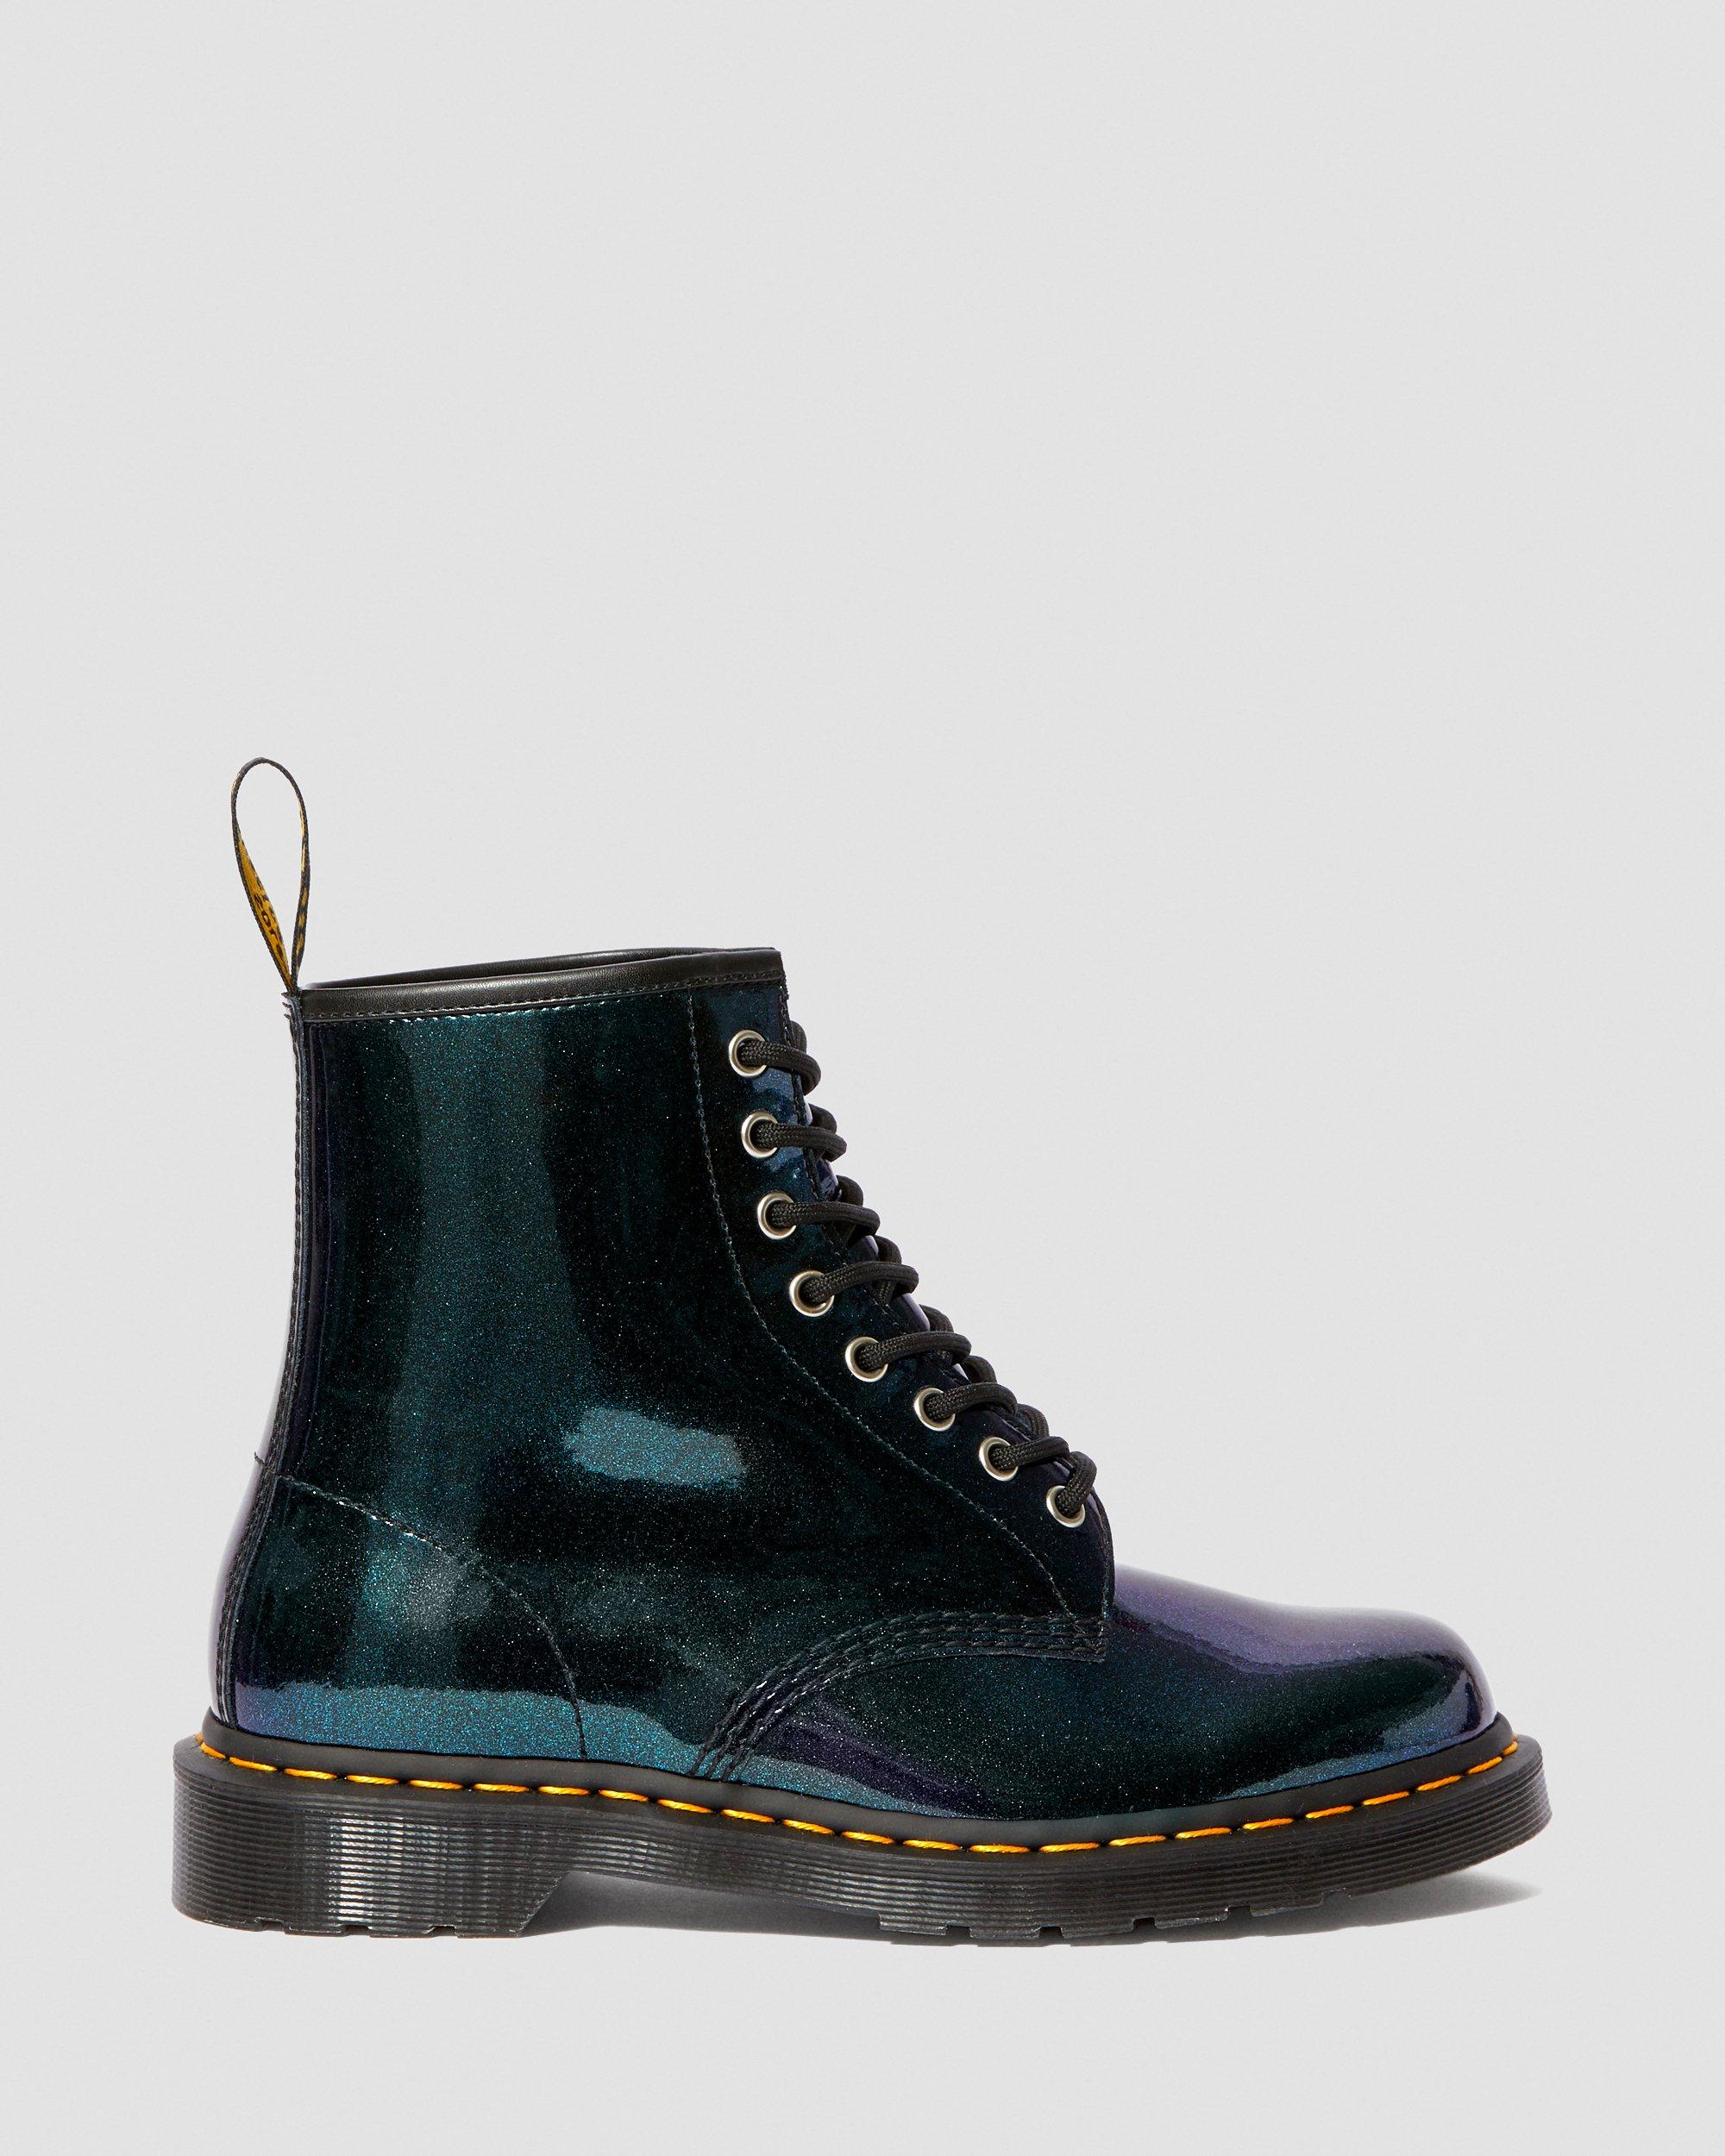 Boots 1460 Sparkle in Teal